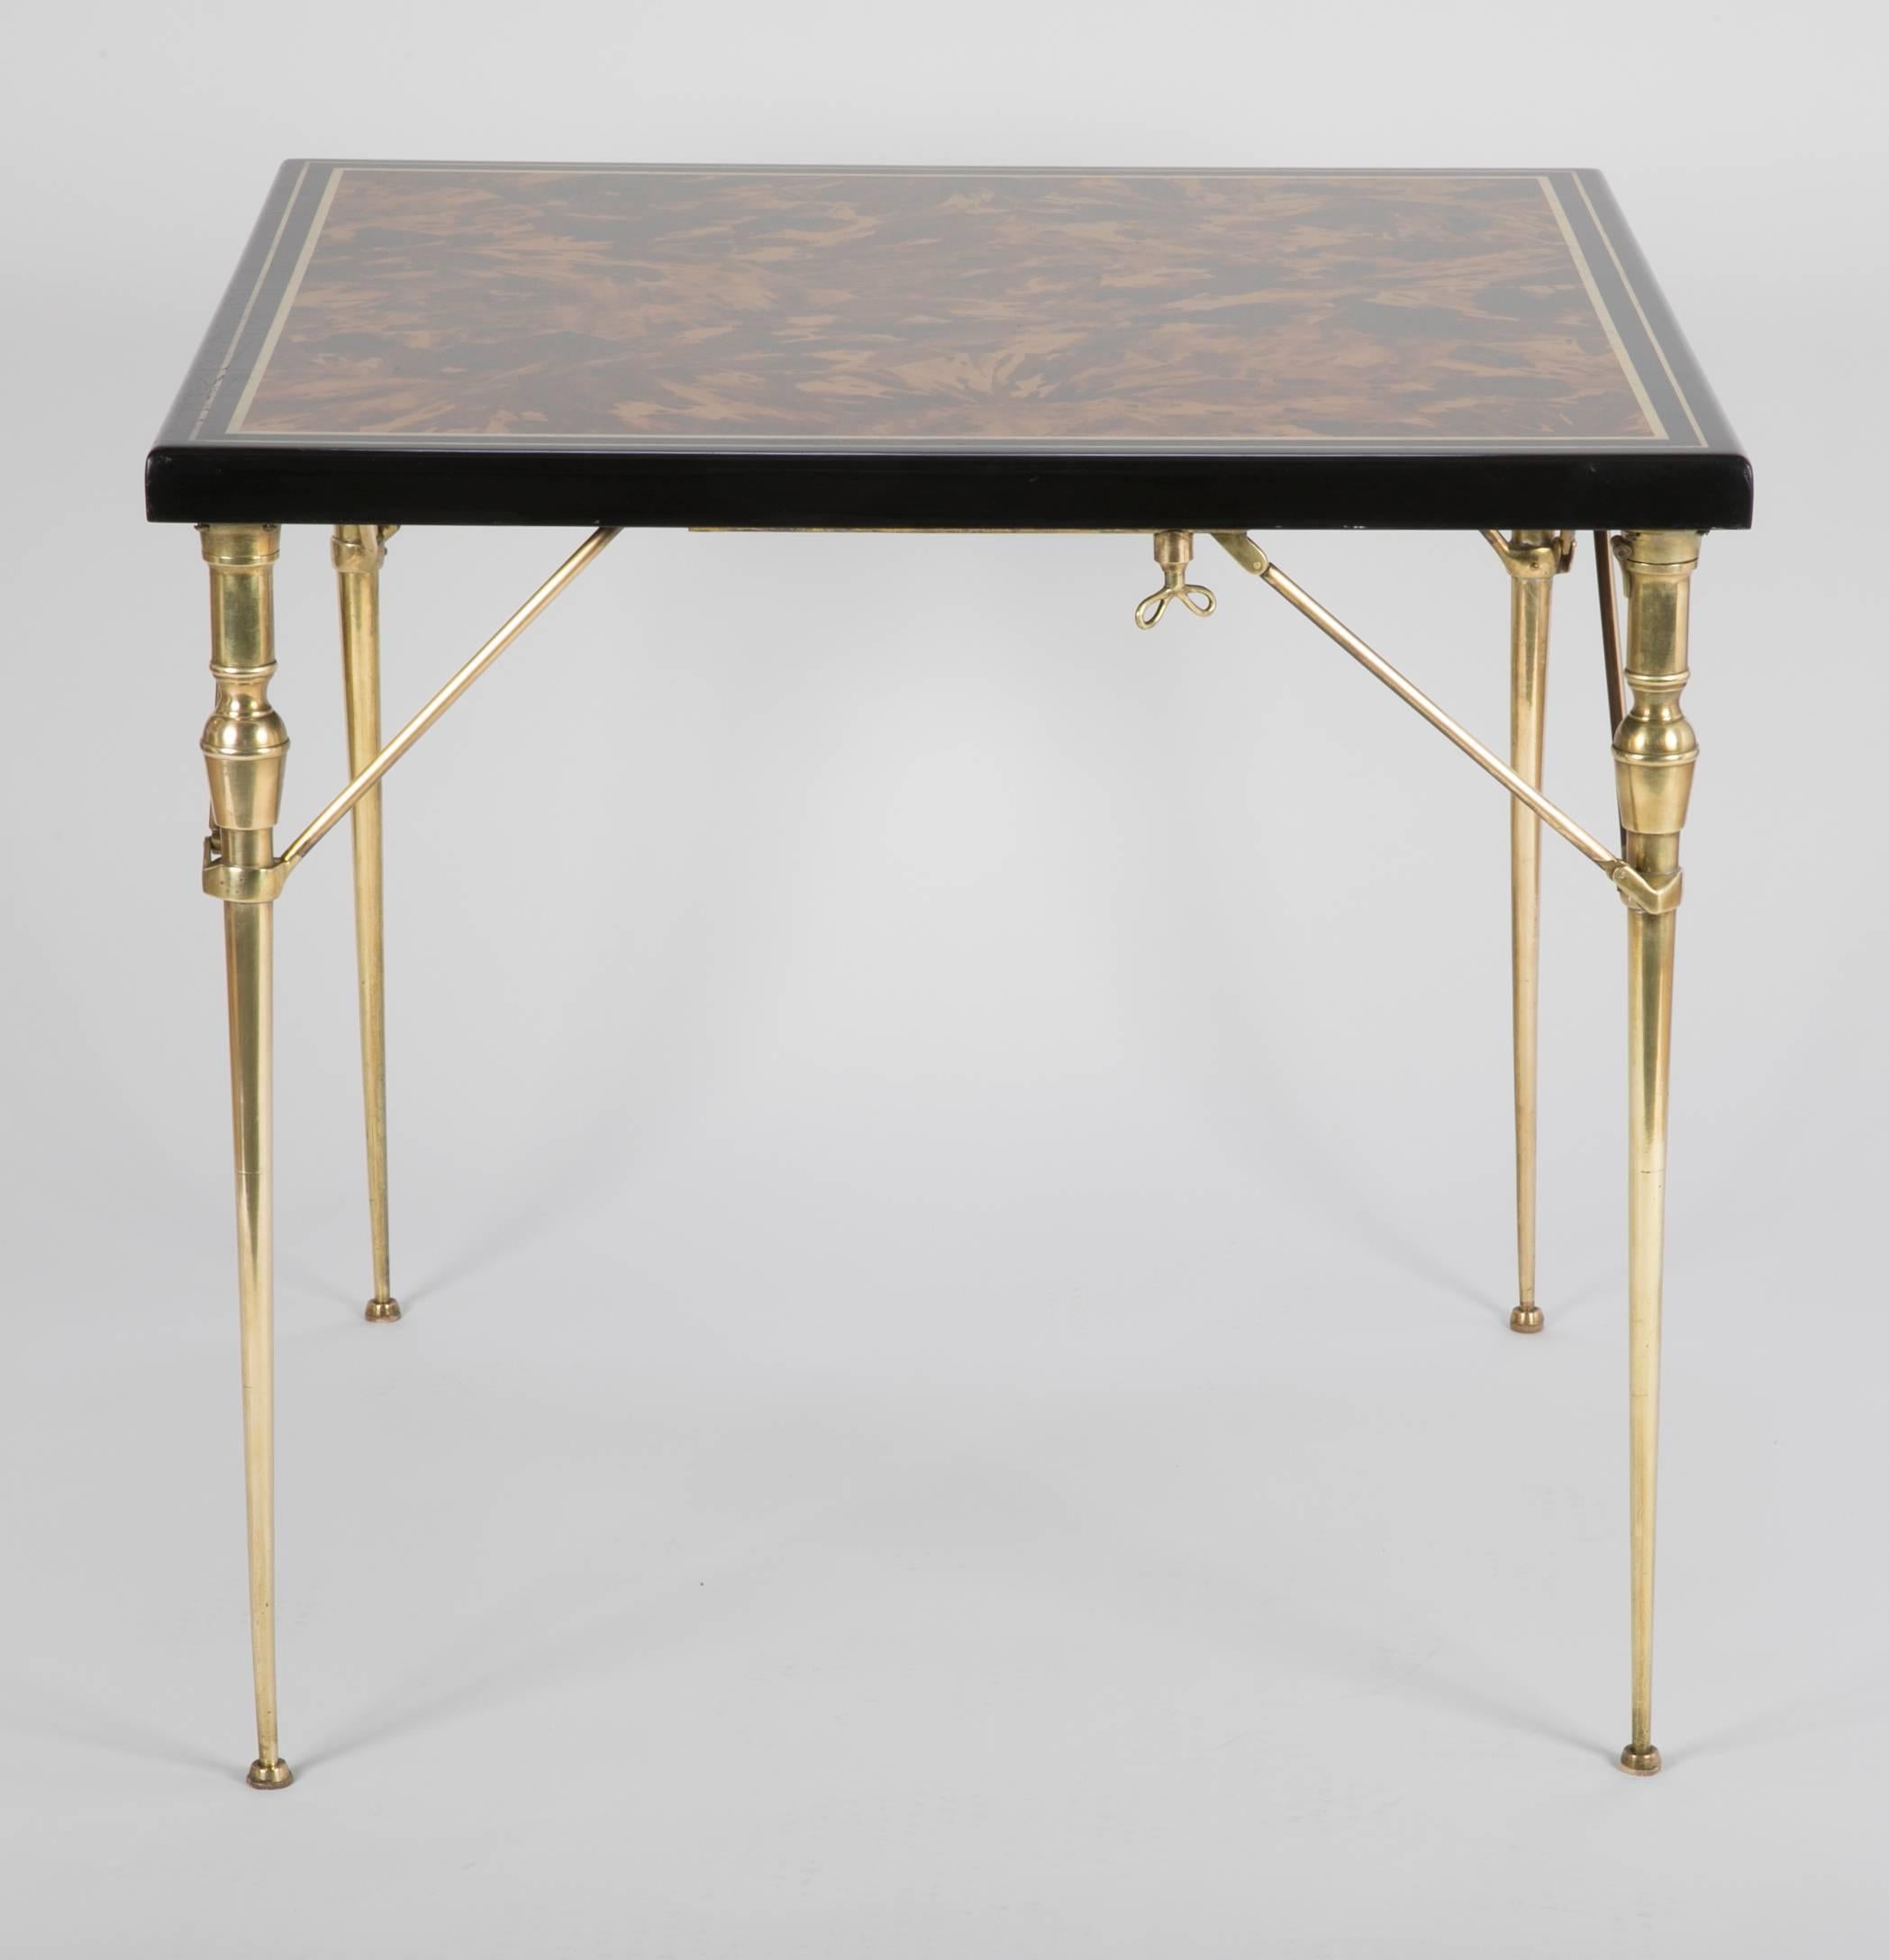 A stunning and possibly unique folding card or bridge table with a solid top of faux tortoise shell framed in black lacquer with a gilt edging. The bronze folding legs are beautifully crafted with and unusual turn-key locking mechanism. Clearly, a